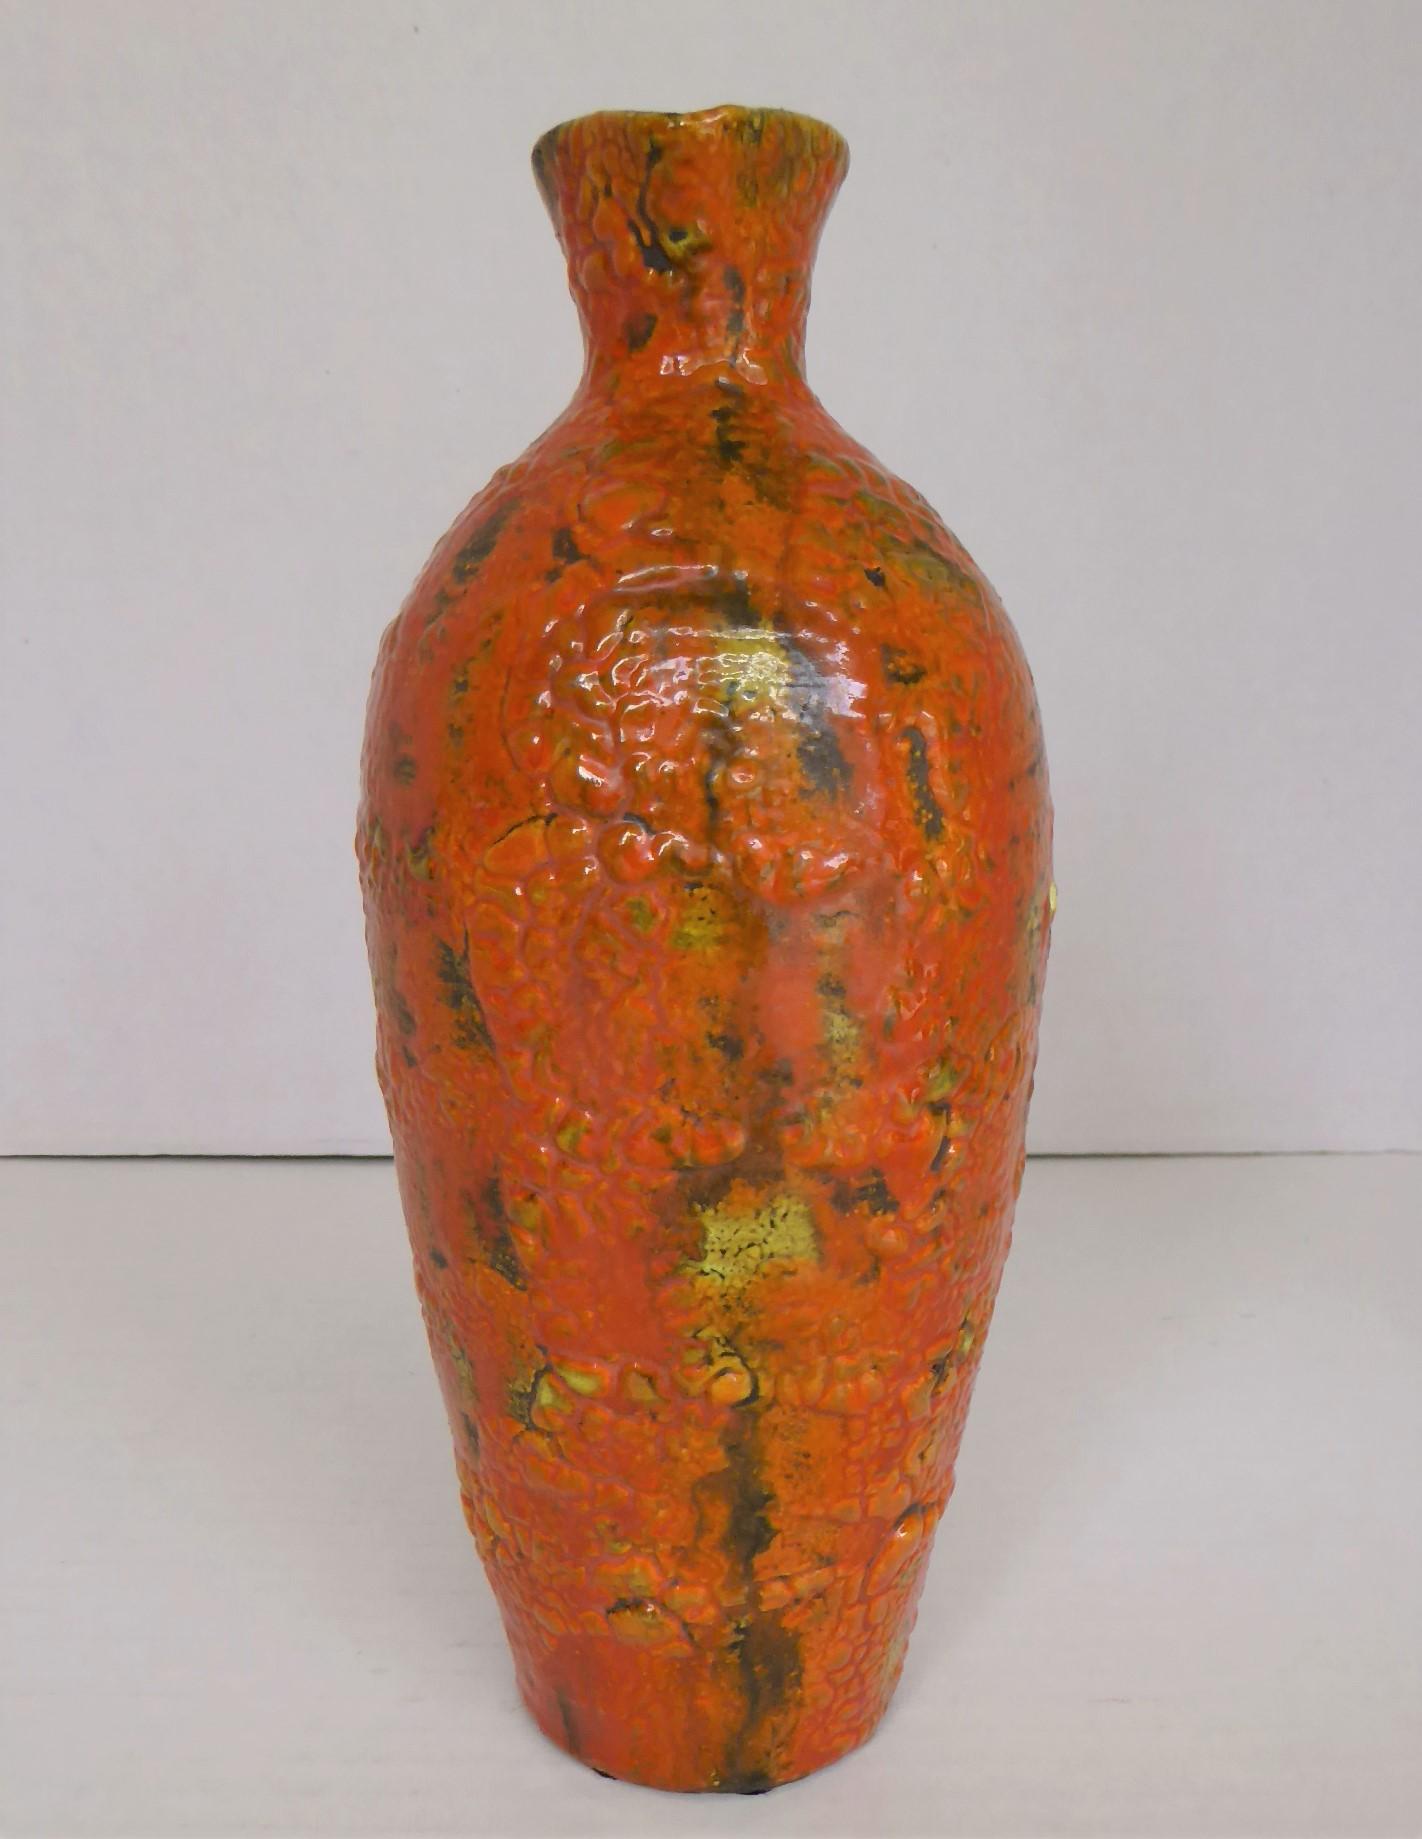 REDDUCED FROM $215....This lovely Hungarian lava glaze handled Ewer in bright orange dates from the late 60s to early 1970s. The heavy tomato orange glazed has been fired on a yellow background which peeks in parts under the lava glaze and has been